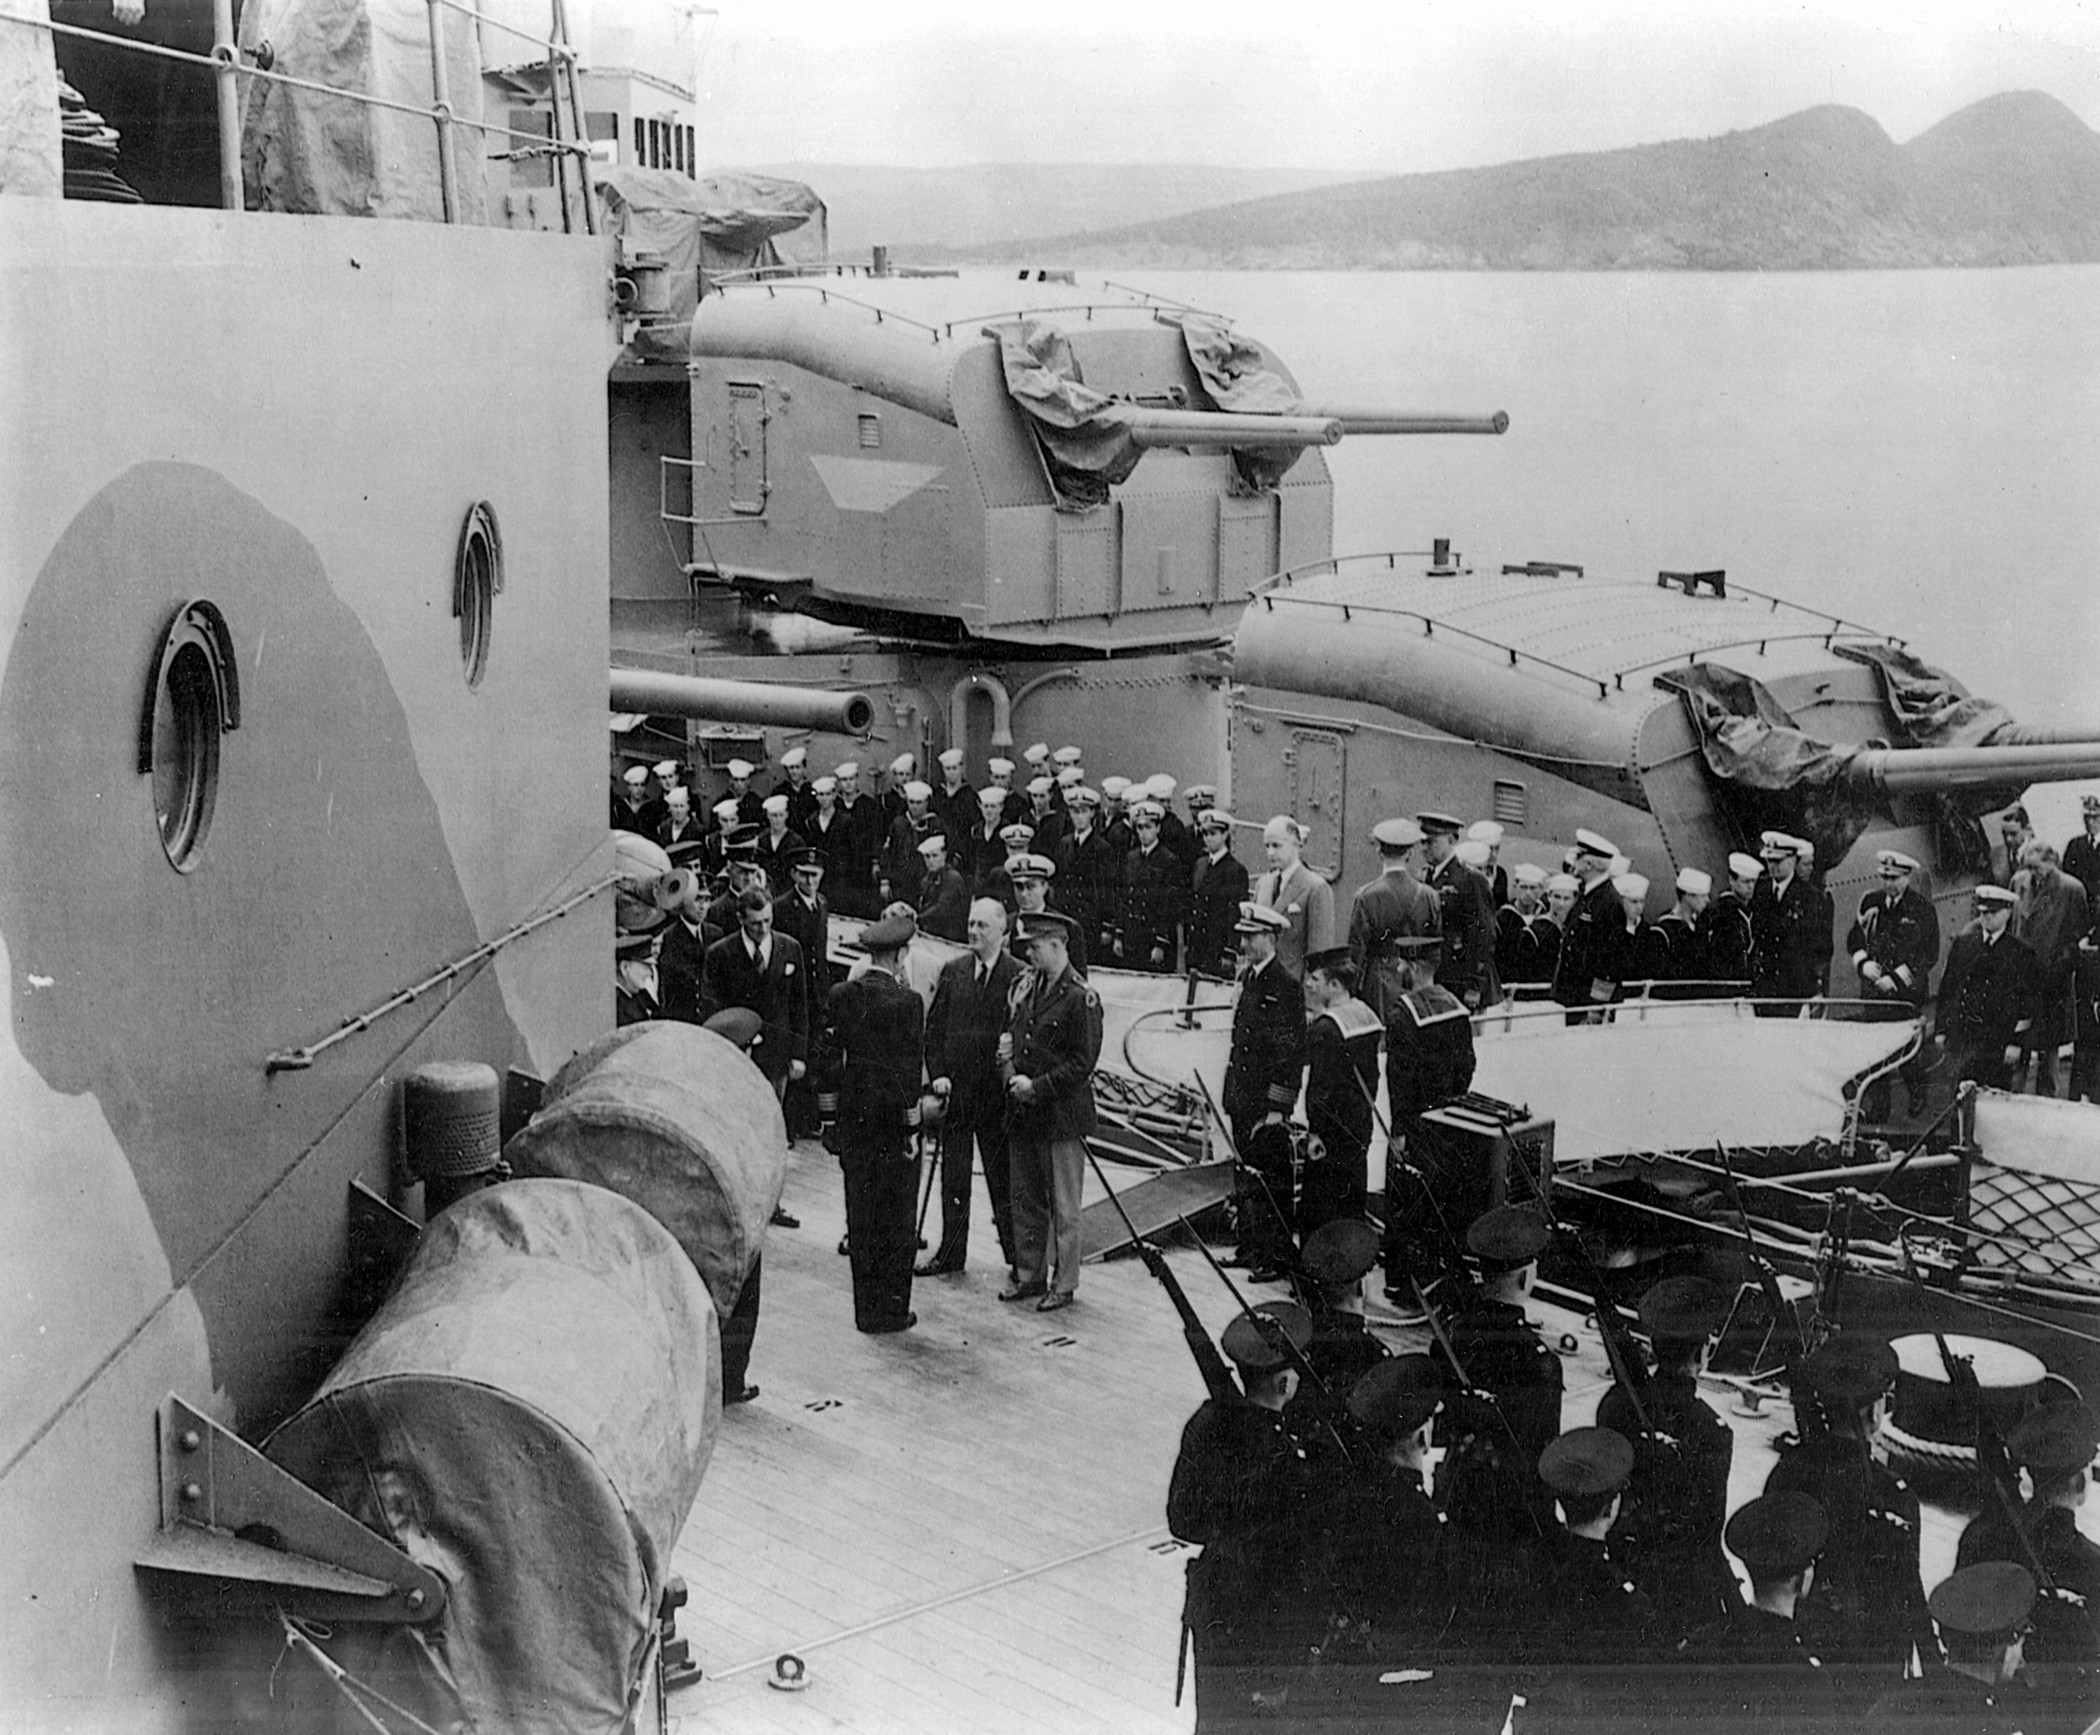 Arriving aboard the battleship HMS Prince of Wales, President Franklin D. Roosevelt is set to begin the historic Argentia Conference with British Prime Minister Winston Churchill.